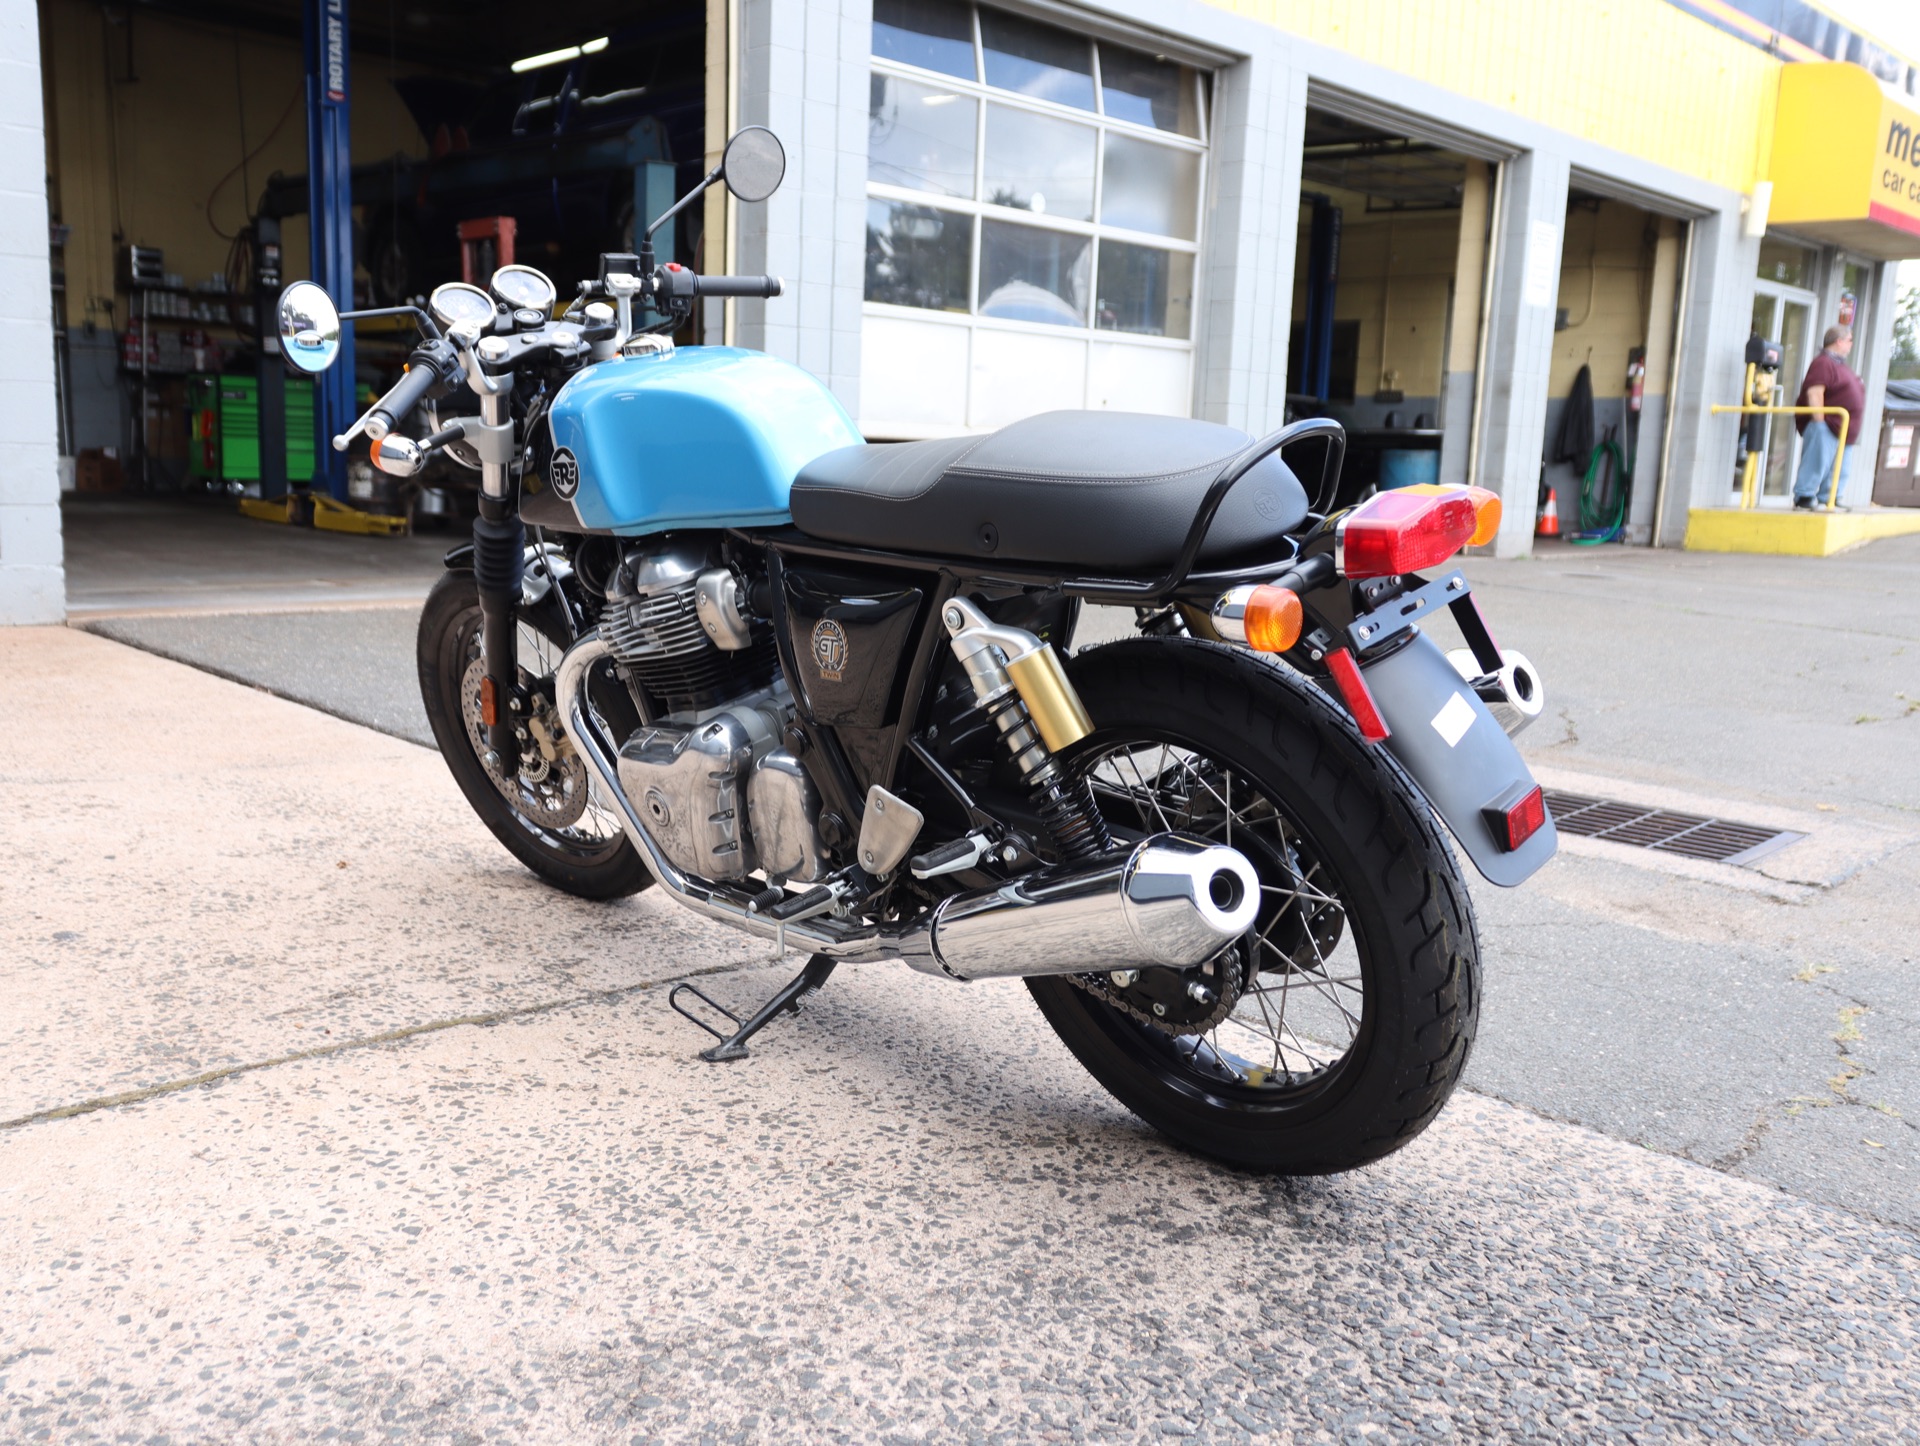 2022 Royal Enfield Continental GT 650 in Enfield, Connecticut - Photo 5